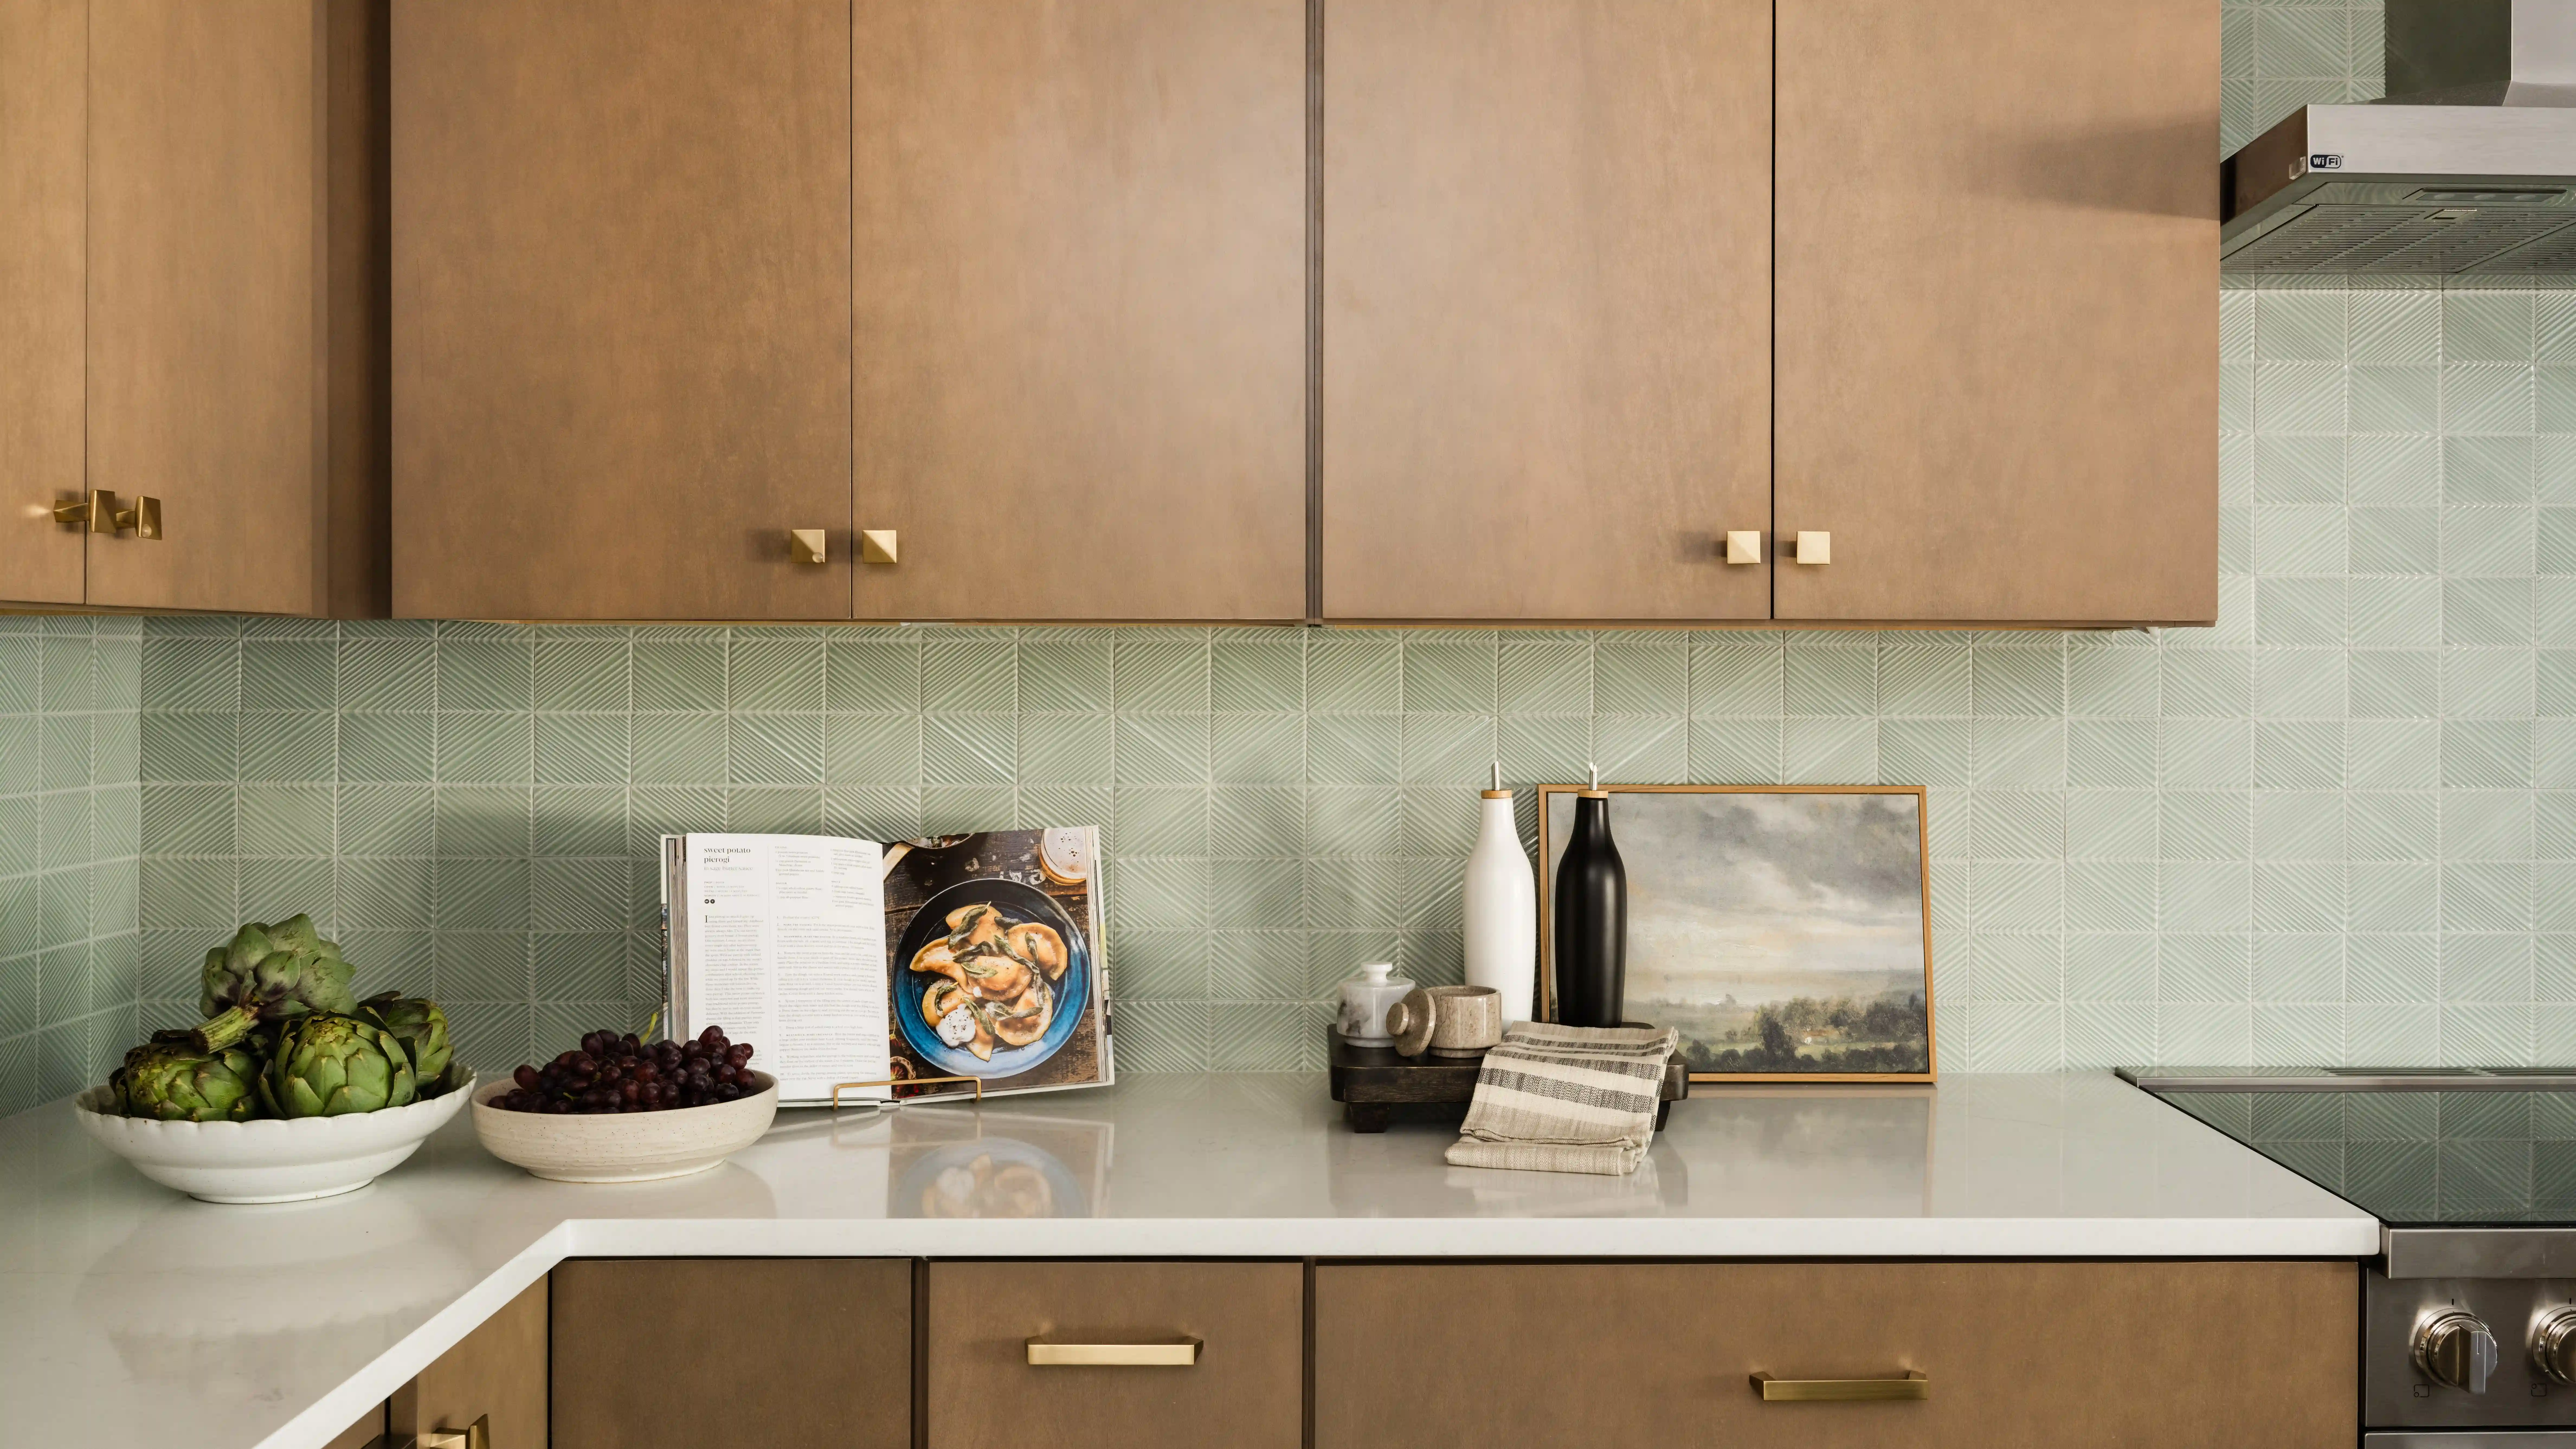 A sage green tile backsplash contrasts with white countertops, warm wood toned cabinetry and a stainless steel black stove top. 